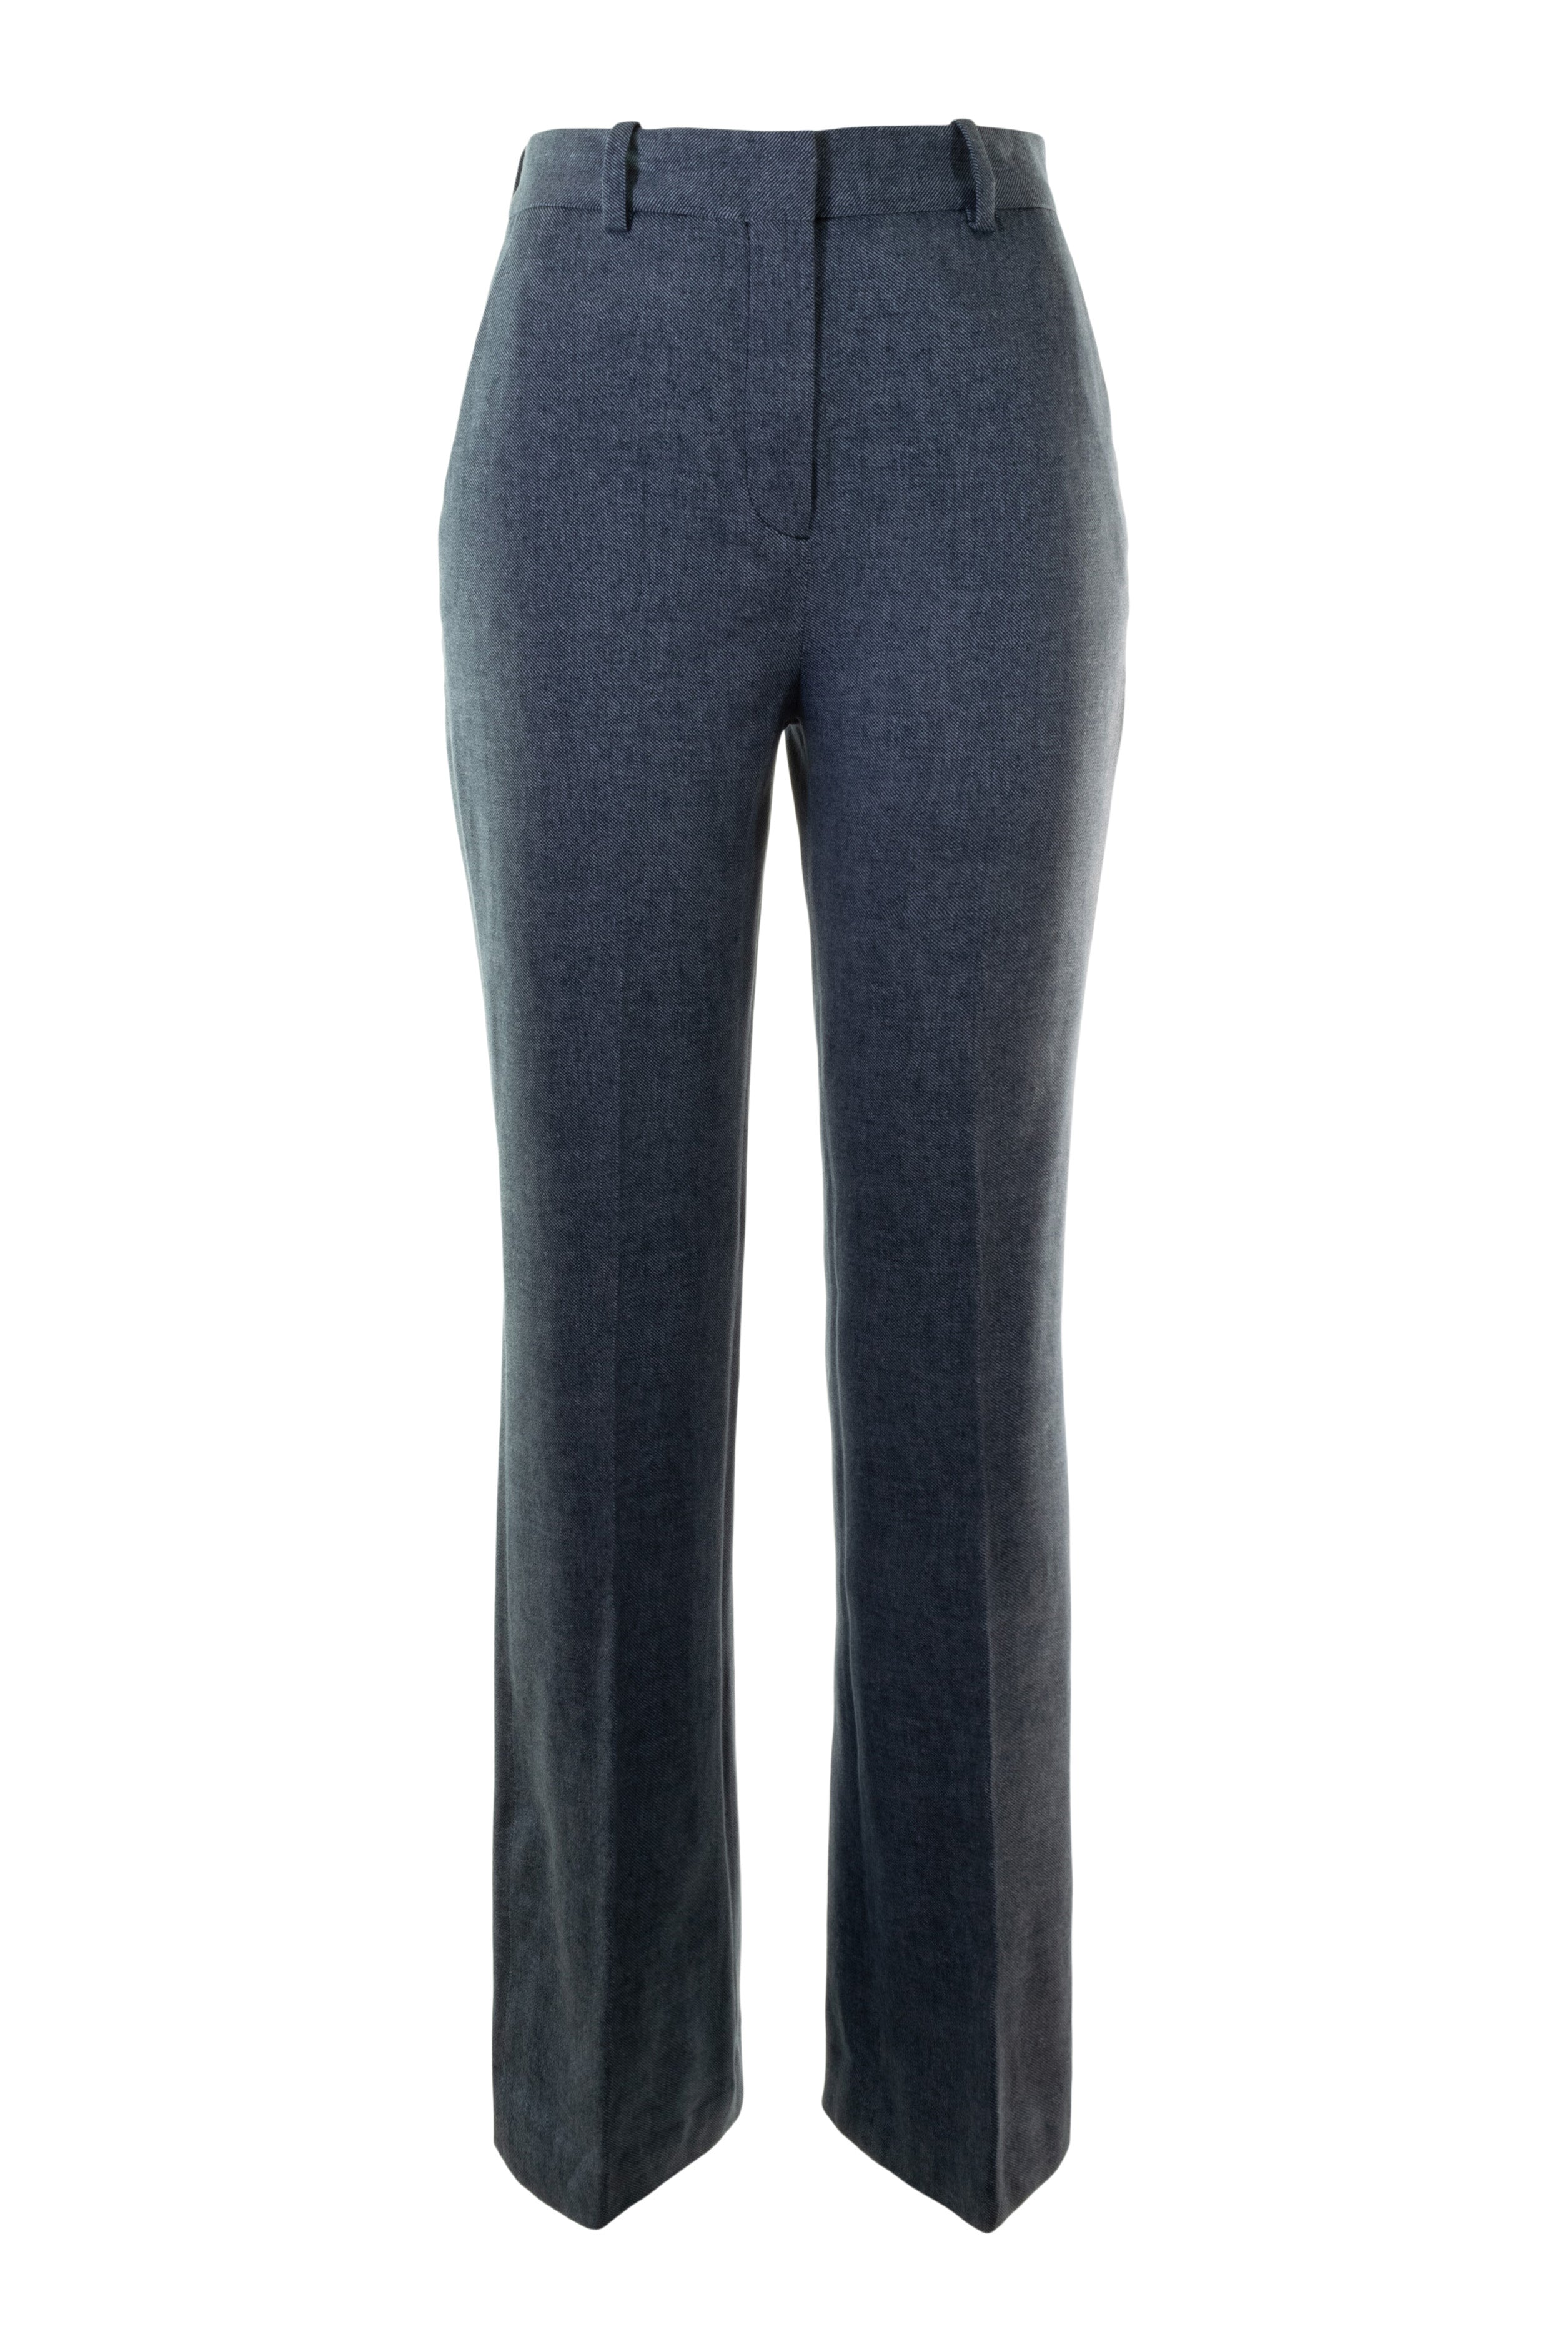 Circolo 1901 Jersey Pants in Indaco